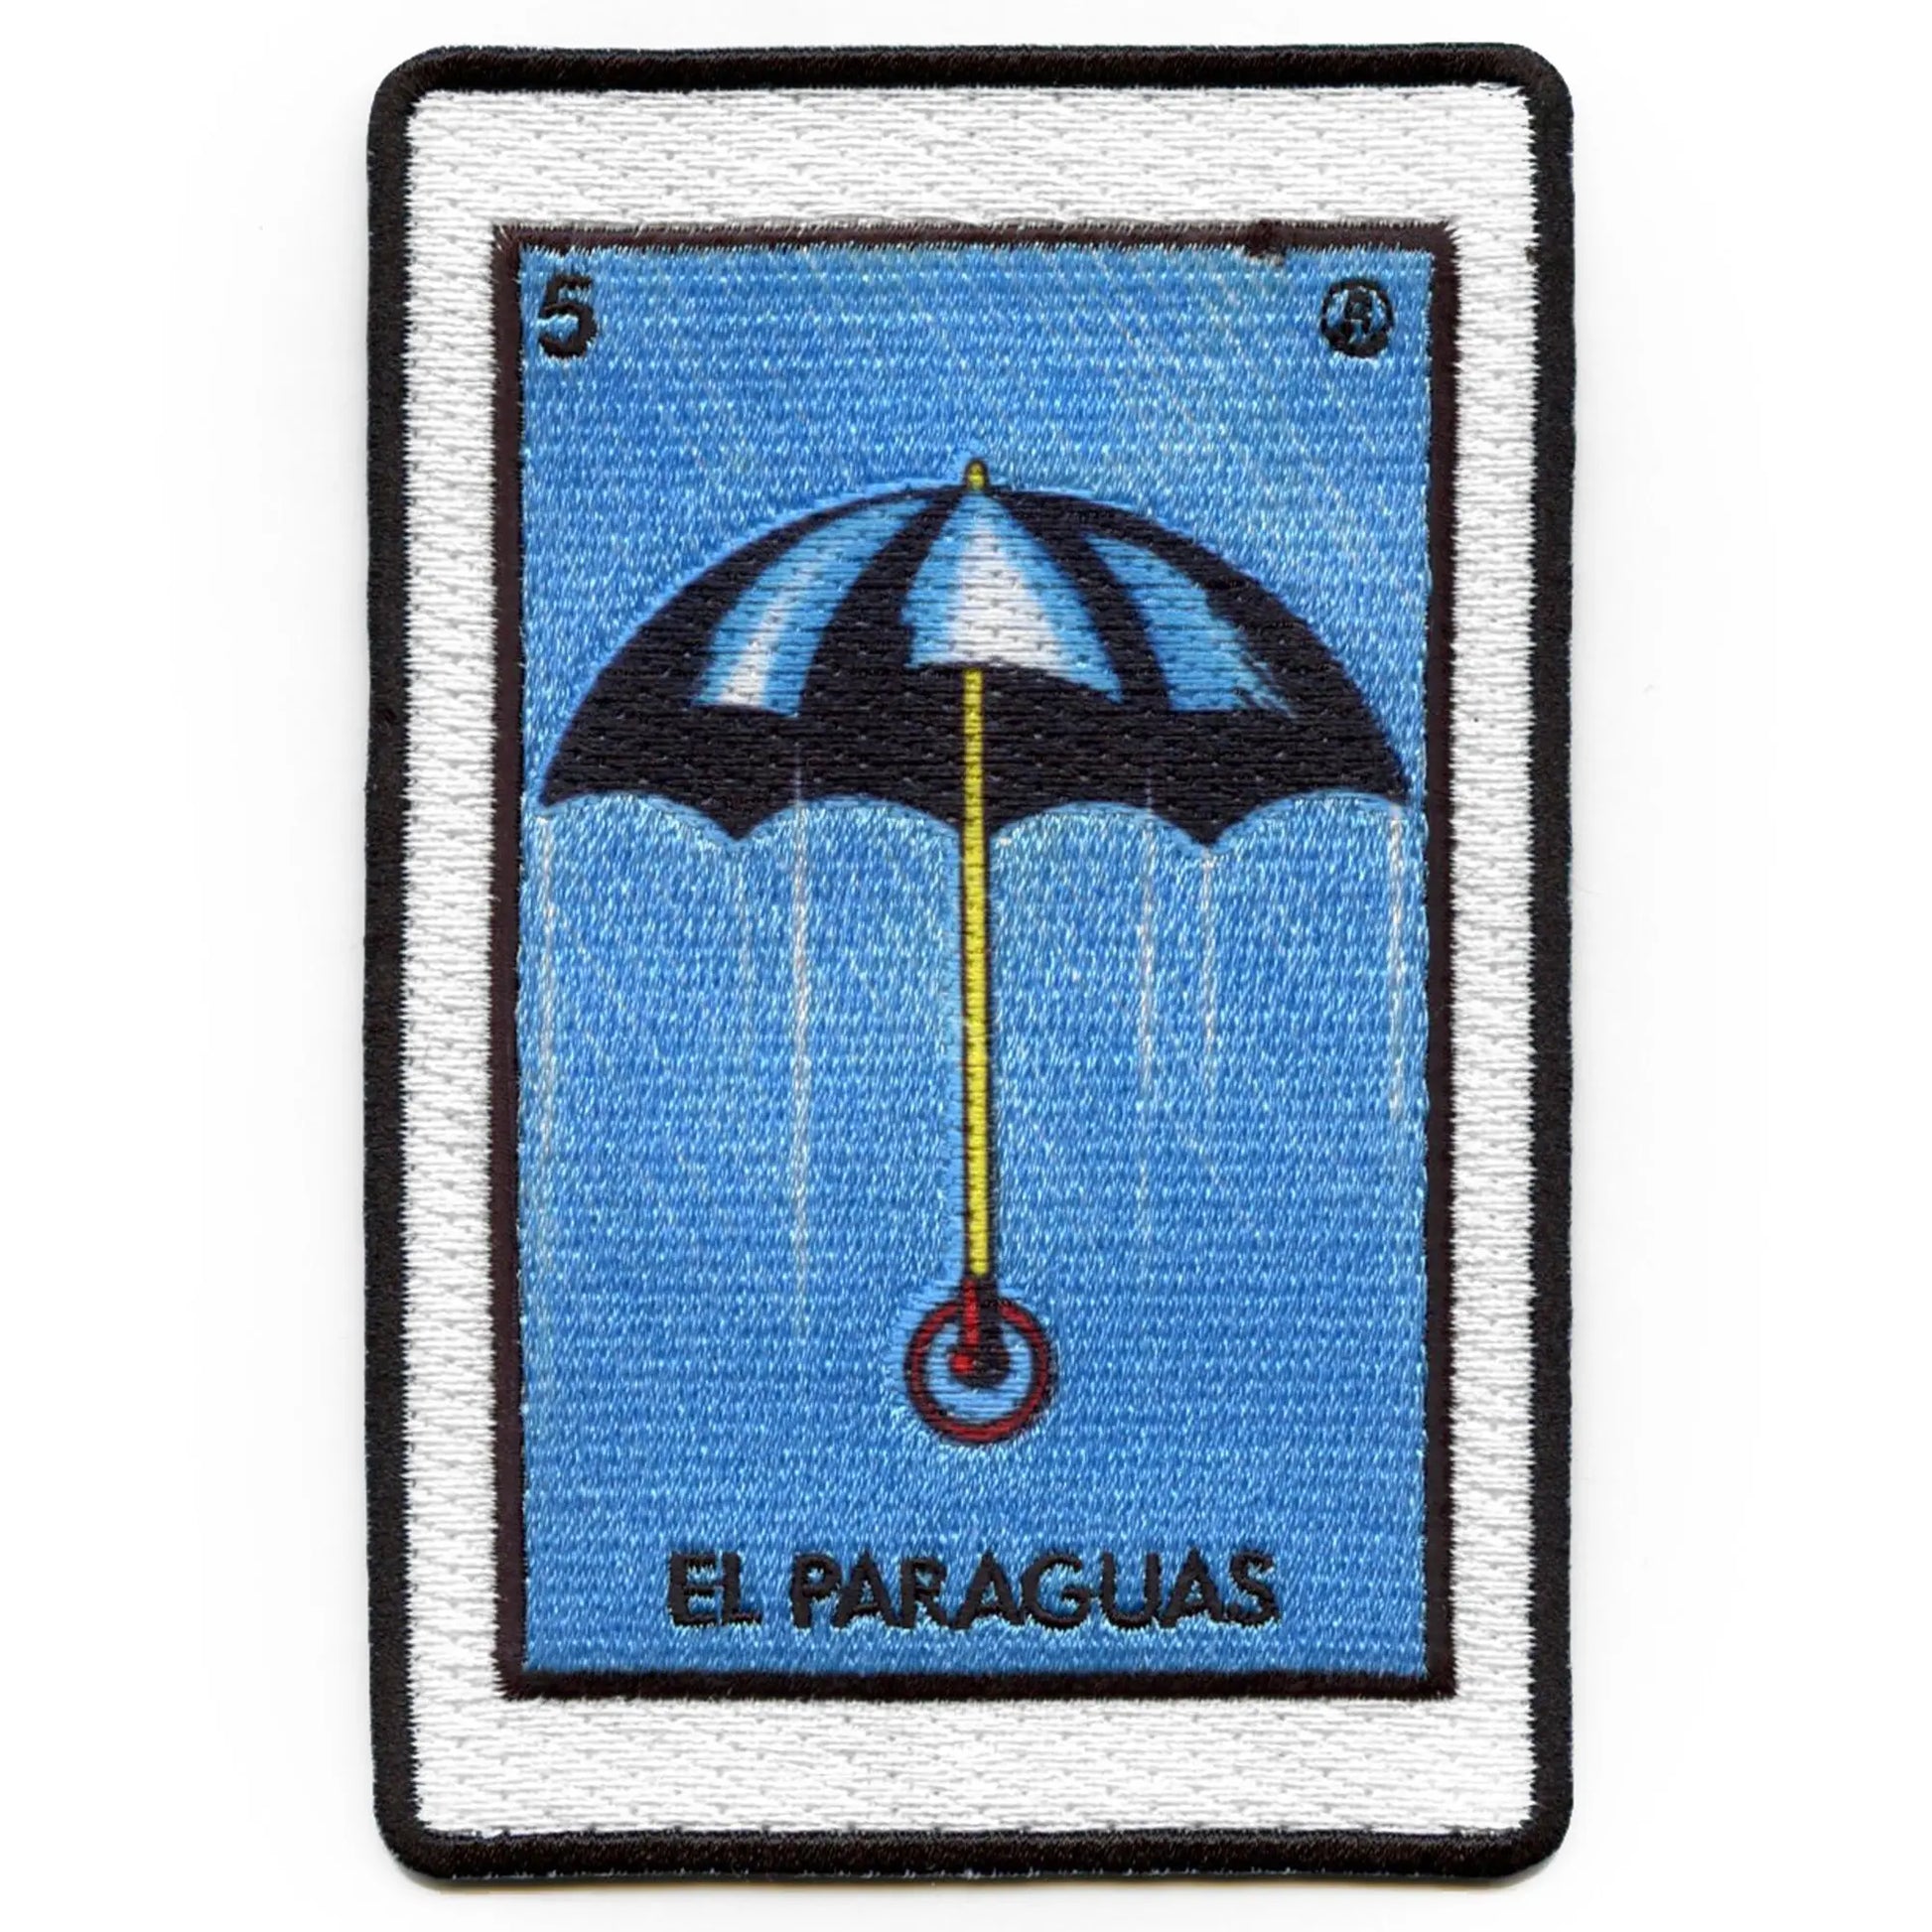 El Paraguas 5 Patch Mexican Loteria Card Sublimated Embroidery Iron On